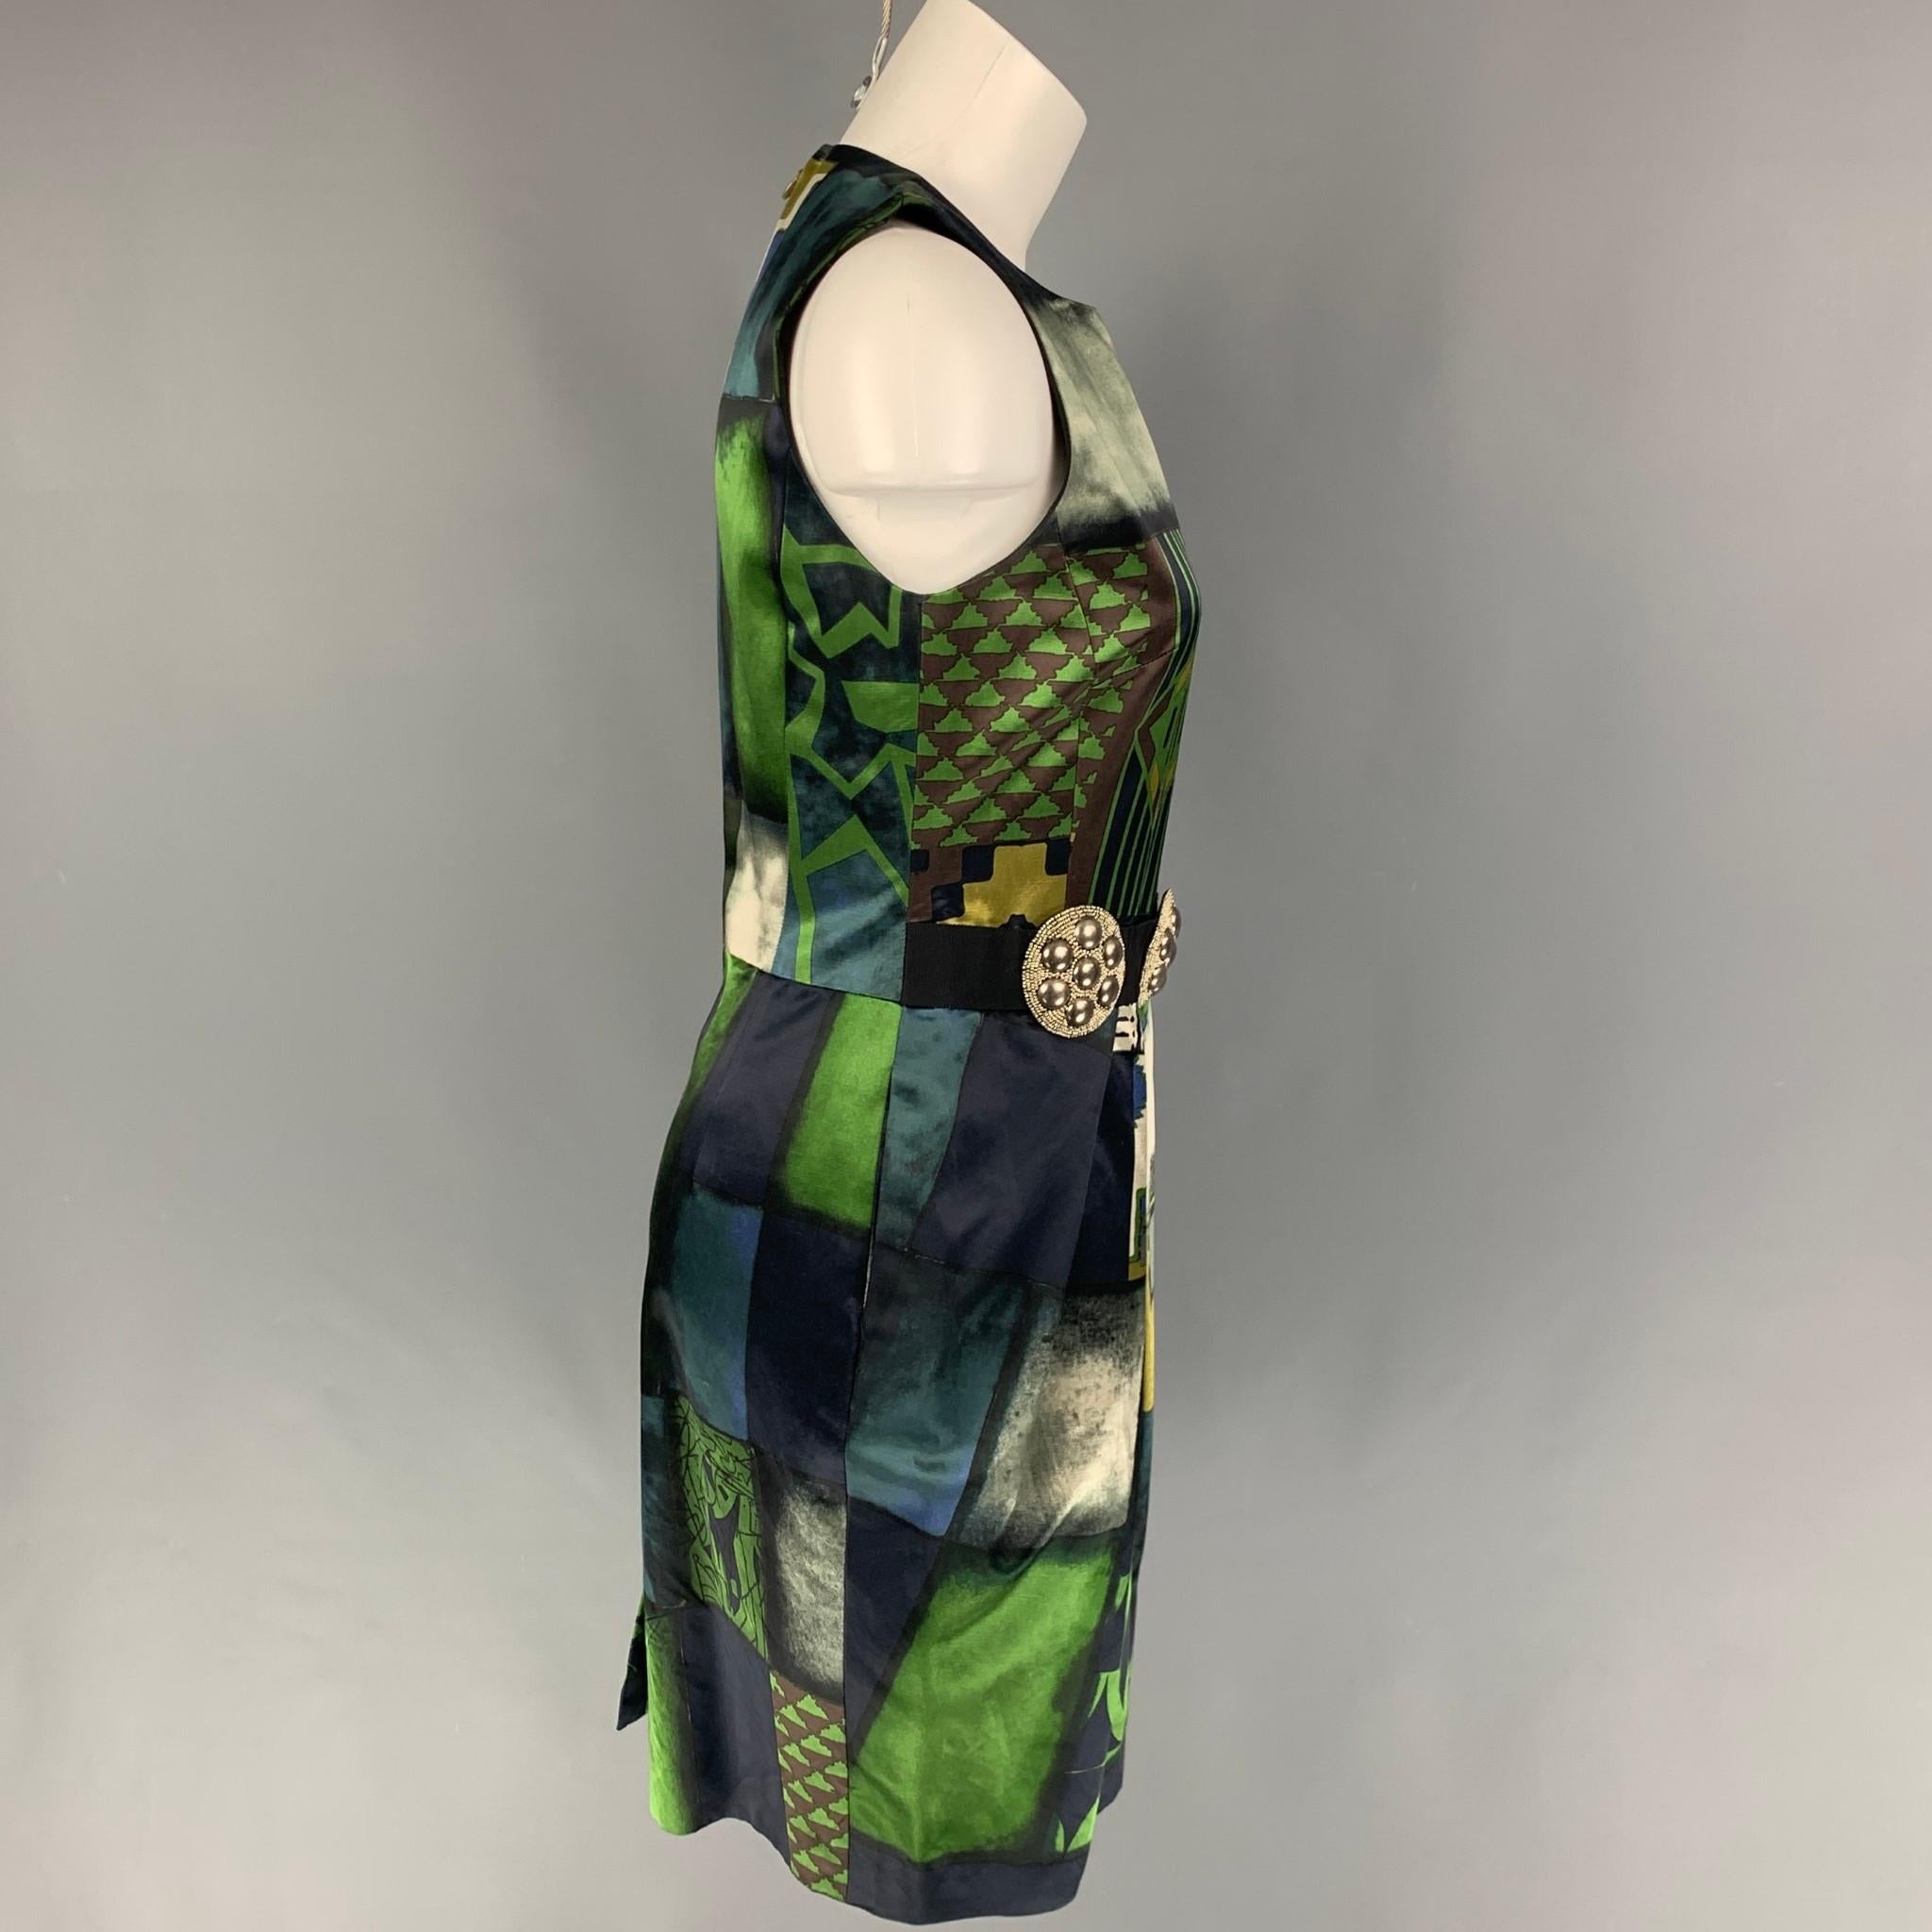 ETRO dress comes in a green & black abstract cotton / viscose featuring a sheath style, sleeveless, studded ribbon detail, slit pockets, and a back zip up closure. Made in Italy. 

Very Good Pre-Owned Condition.
Marked: 42

Measurements:

Shoulder: